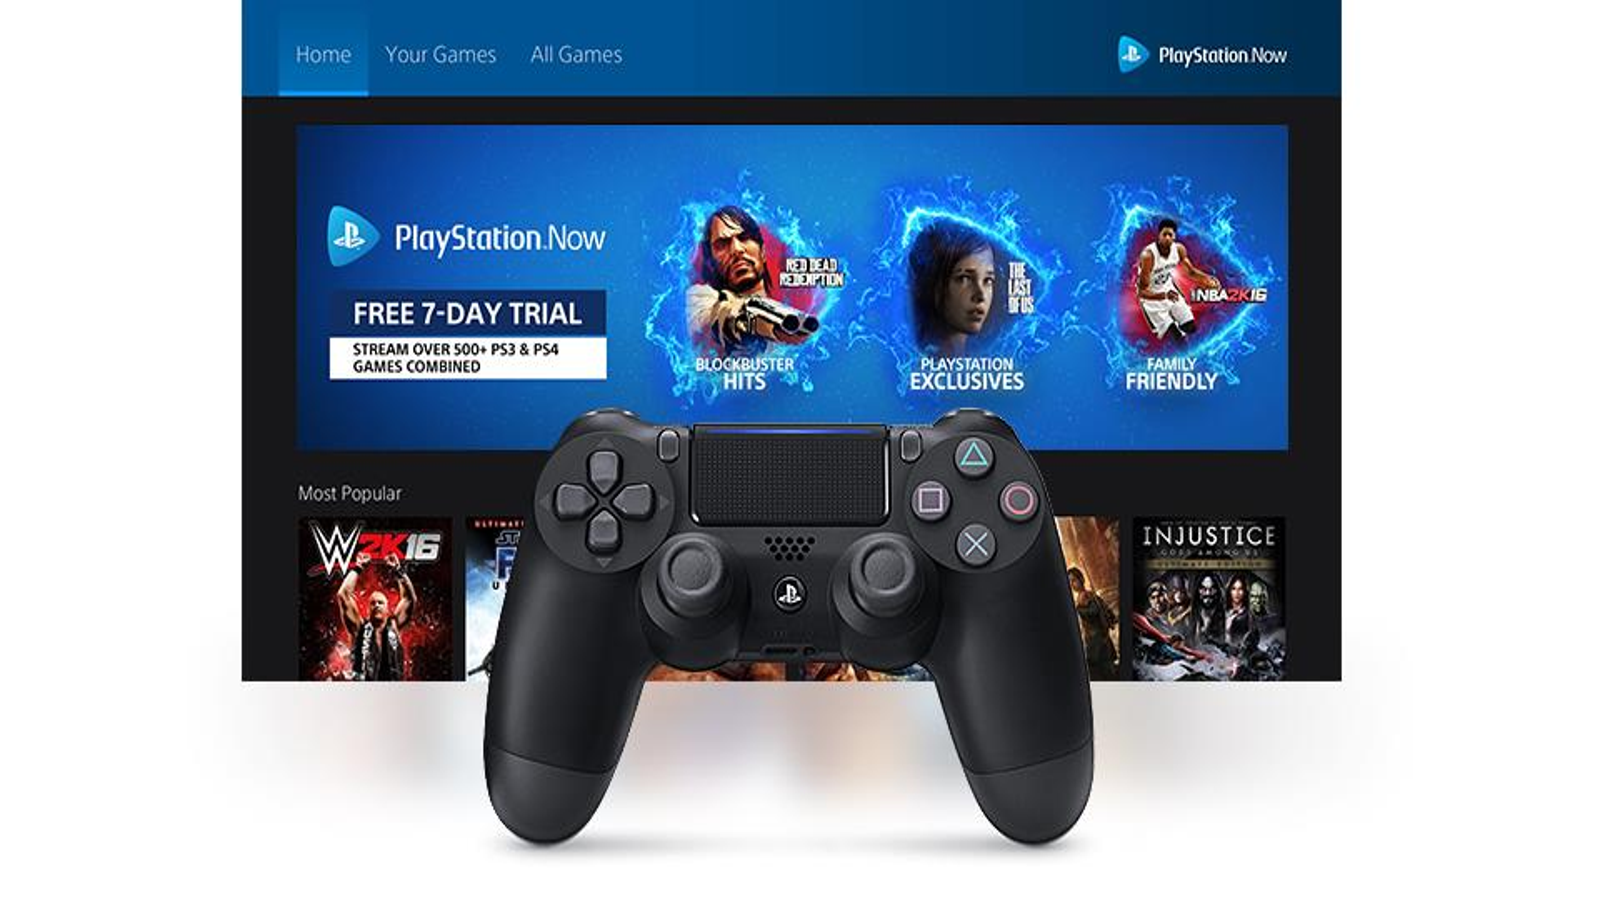 Can you download PlayStation Now games to your PC?